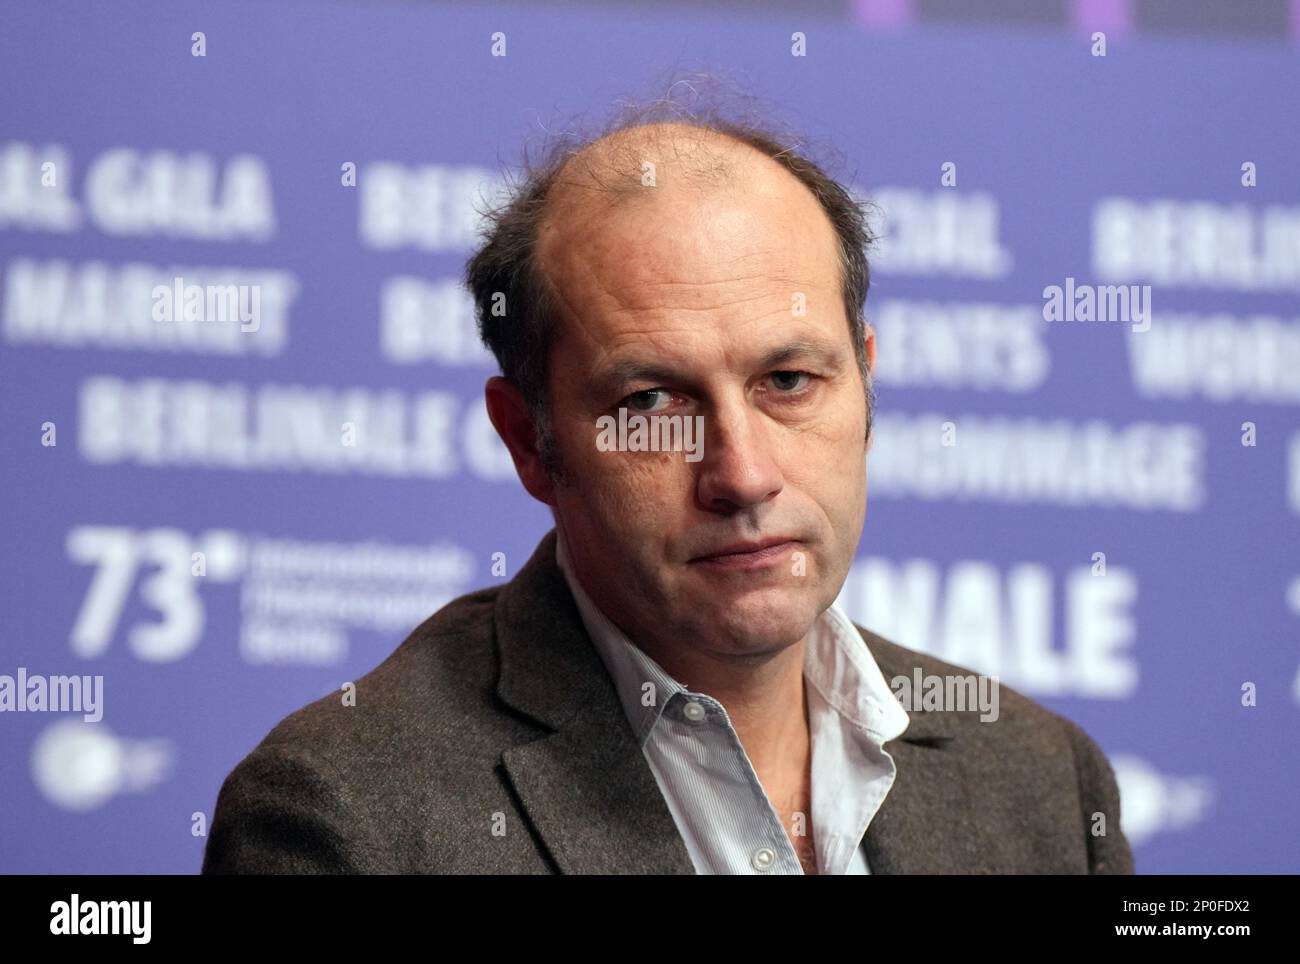 Berlin, Germany. 24th Feb, 2023. Francesco Melzi d'Eril, producer, at the press conference of the film 'L'Ultima Notte di Amore' (Last Night of Amore), which will be screened in the Berlinale Special Gala section of the Berlinale. The 73rd International Film Festival will take place in Berlin from Feb. 16-26, 2023. Credit: Soeren Stache/dpa/Alamy Live News Stock Photo